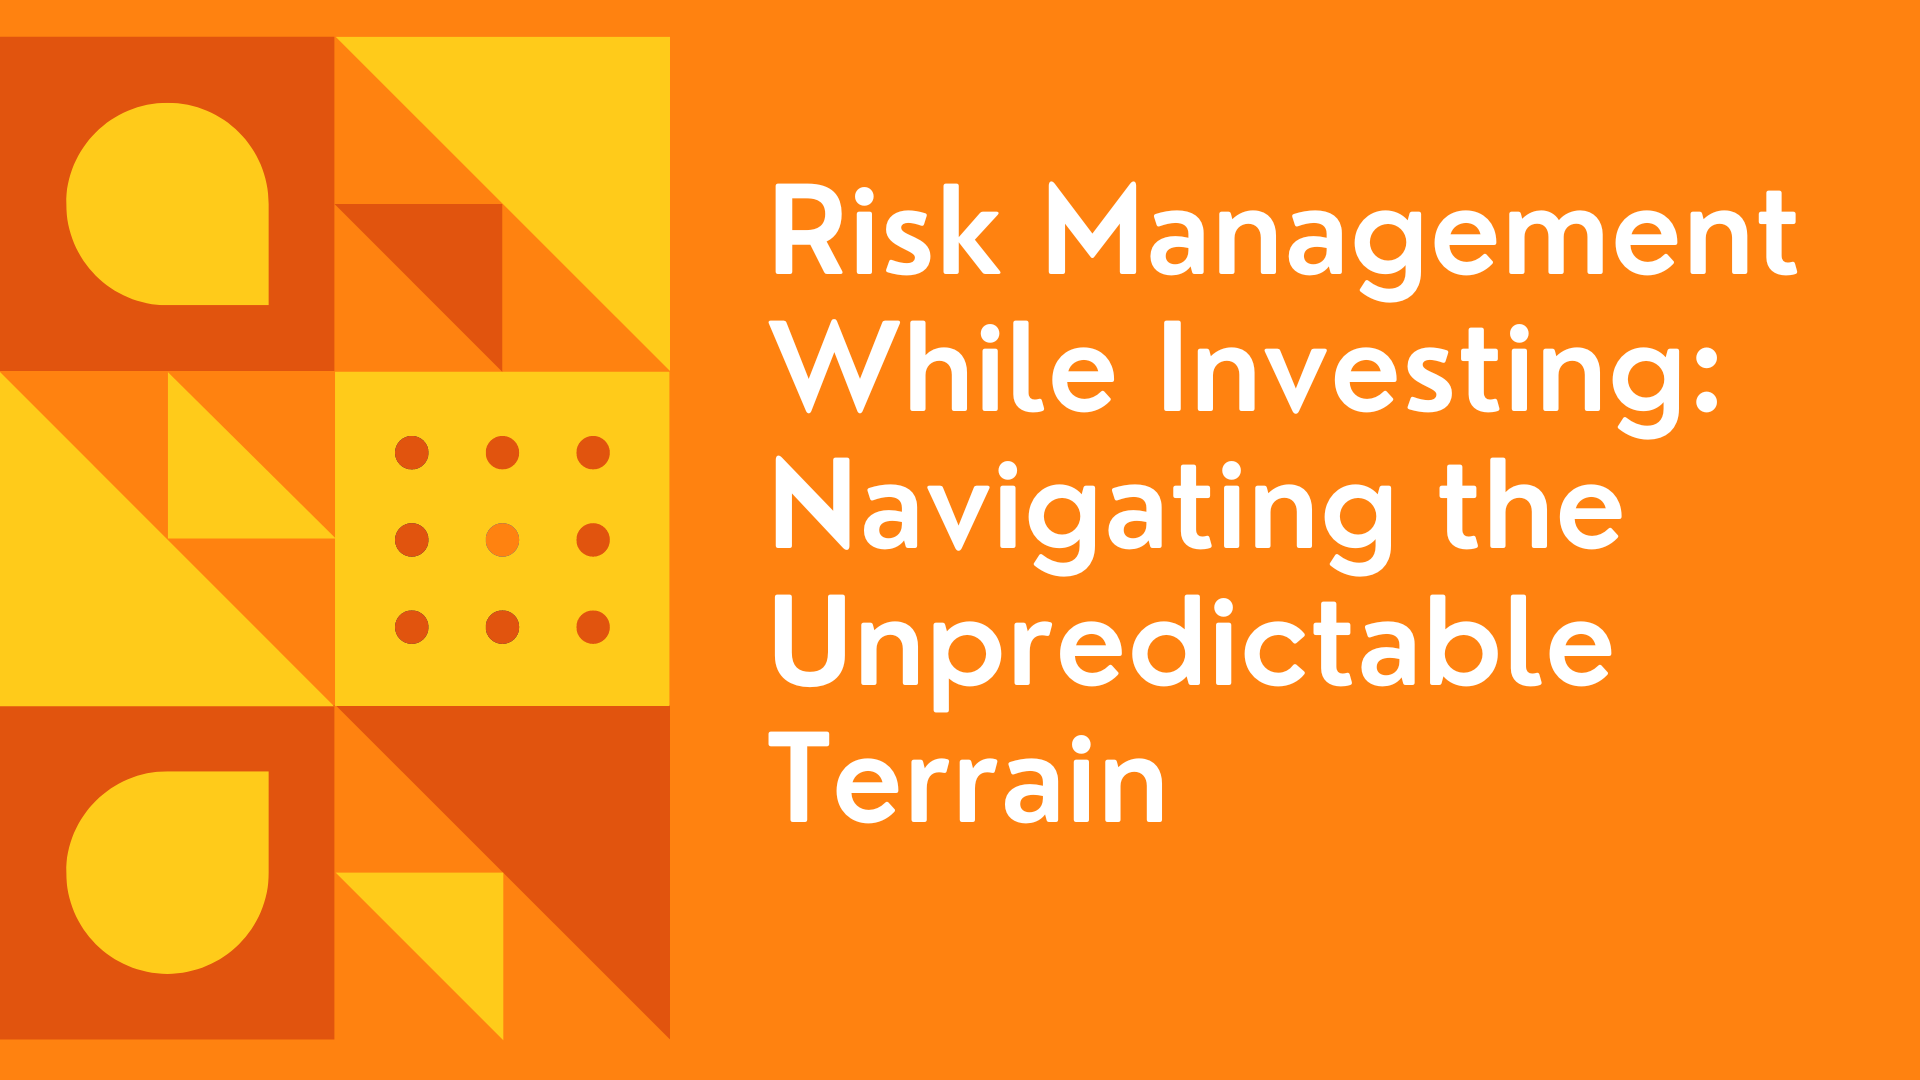 Risk Management While Investing: Navigating the Unpredictable Terrain